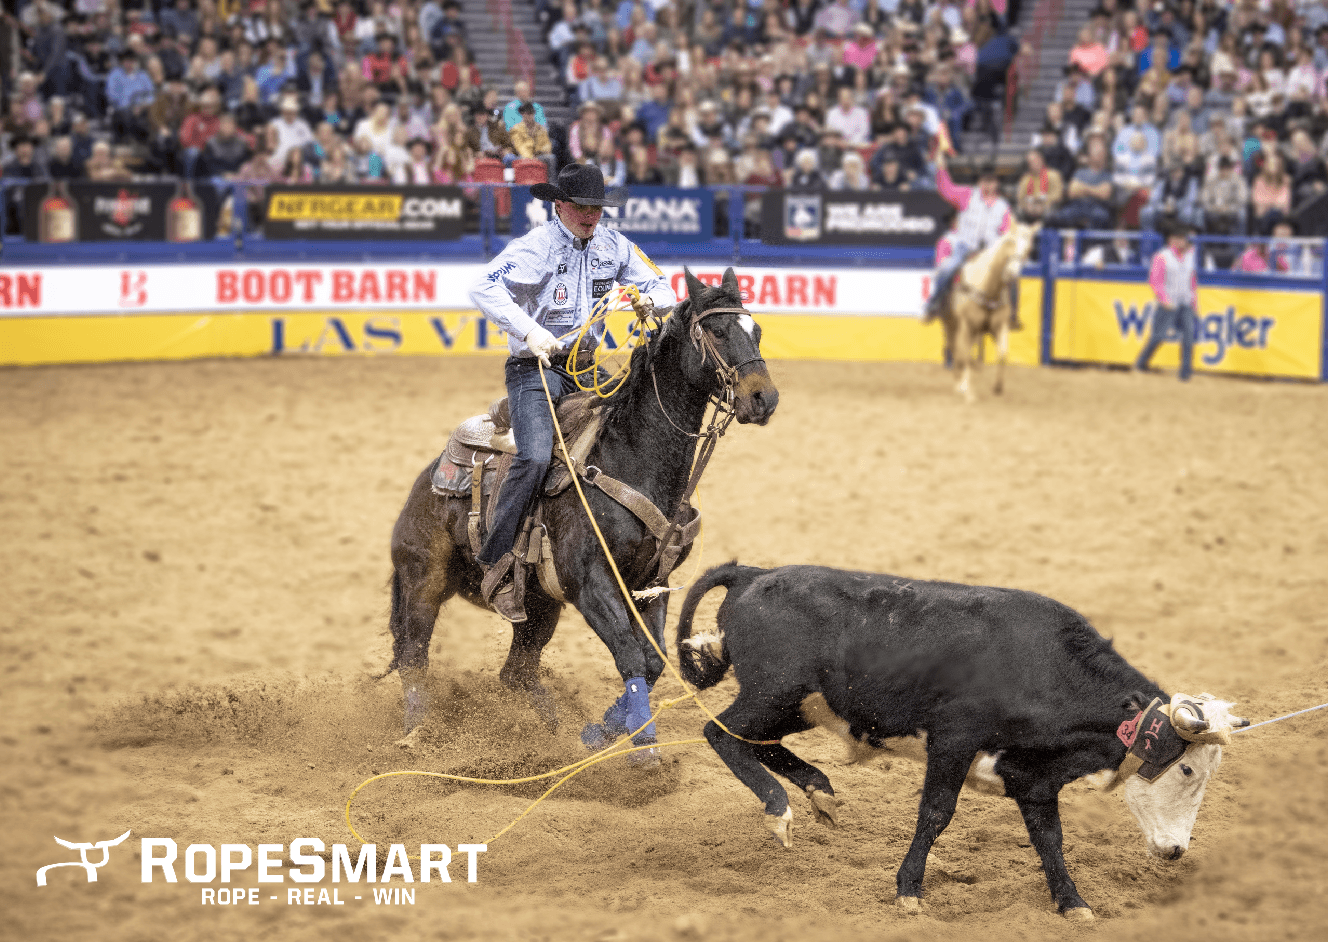 Wesley Thorp Round 5 at the 2019 WNFR 